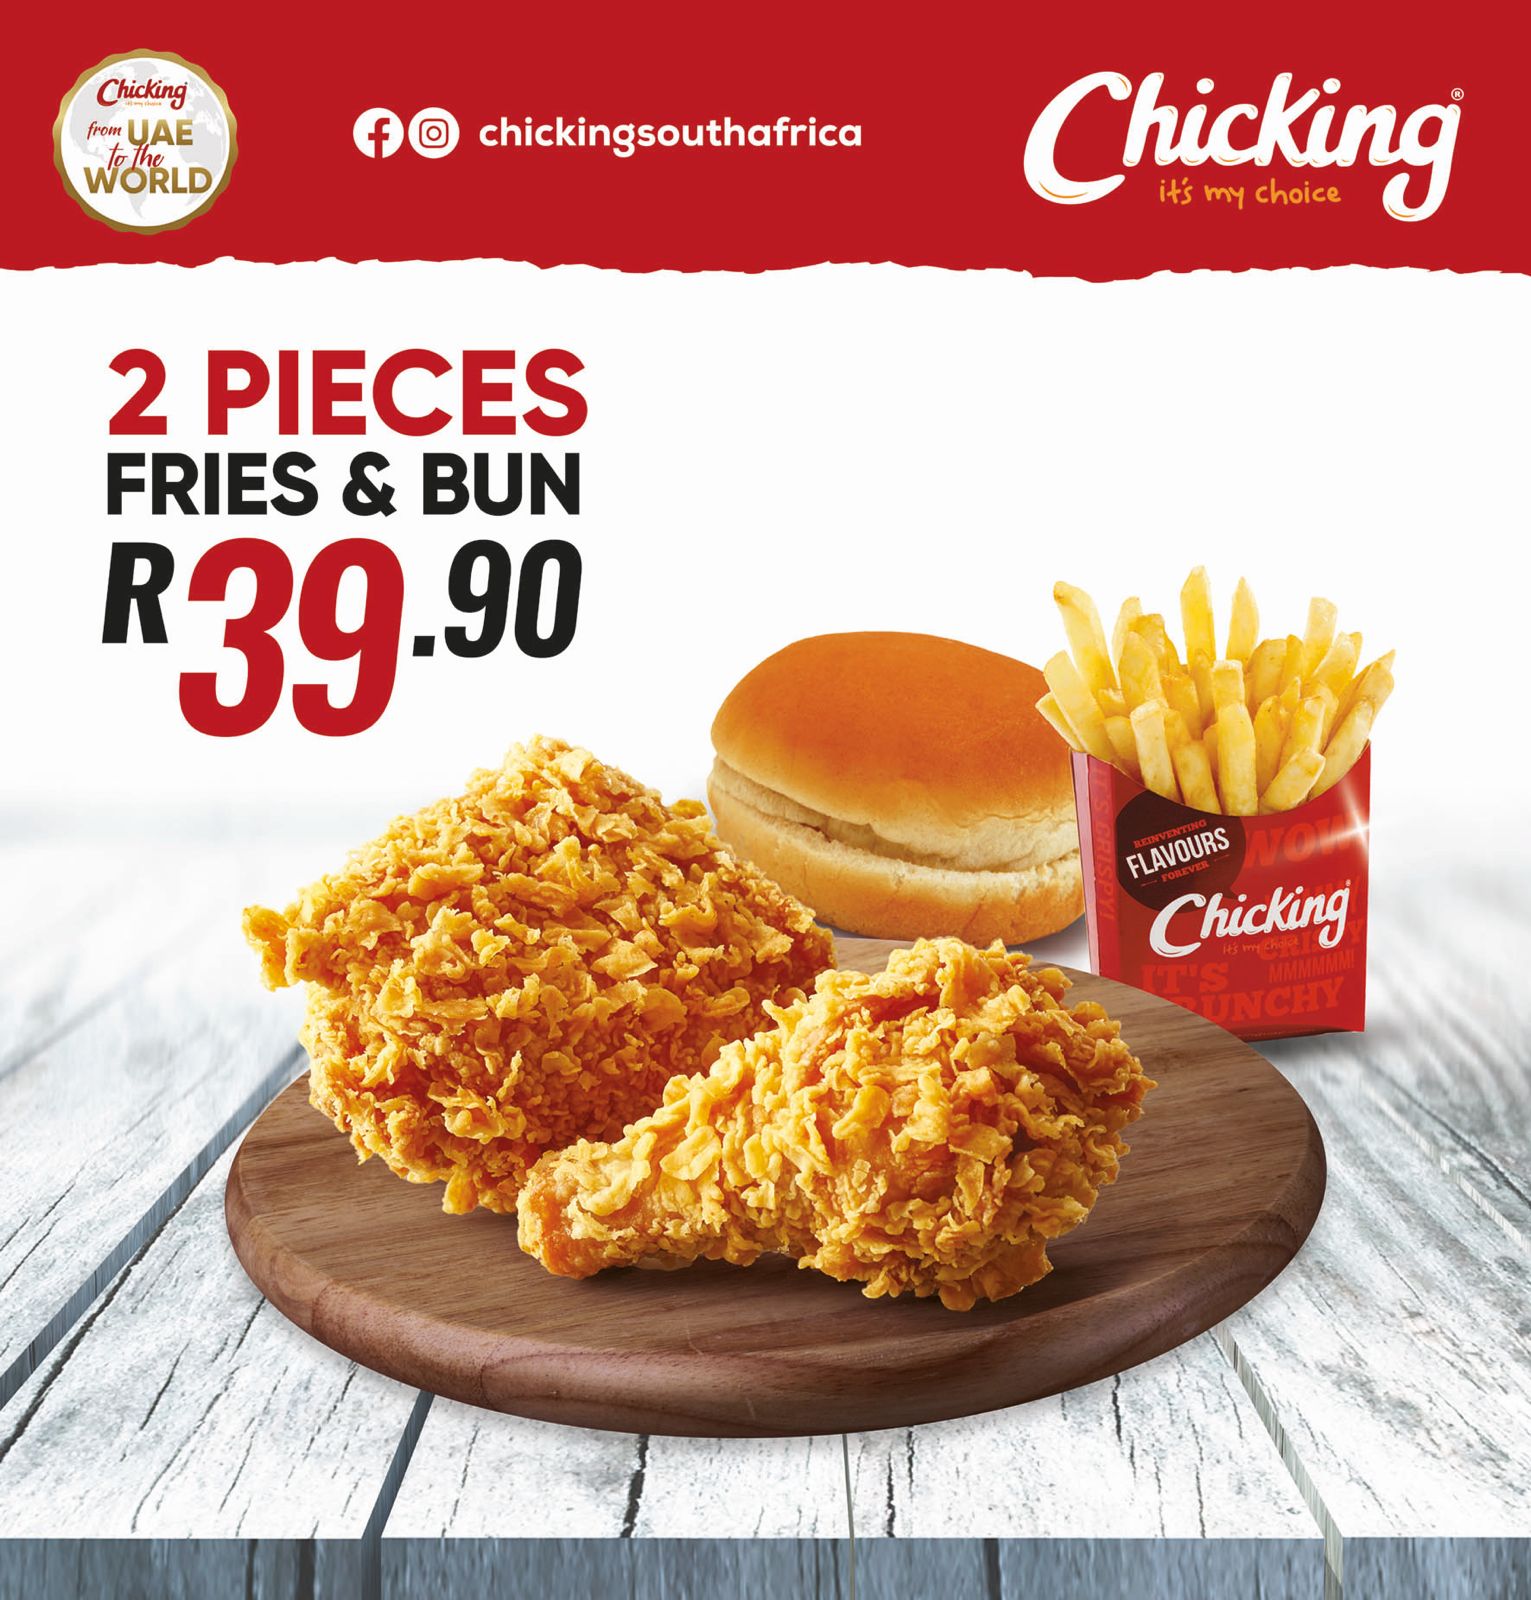 Chicking South Africa 2 Piece chicken special